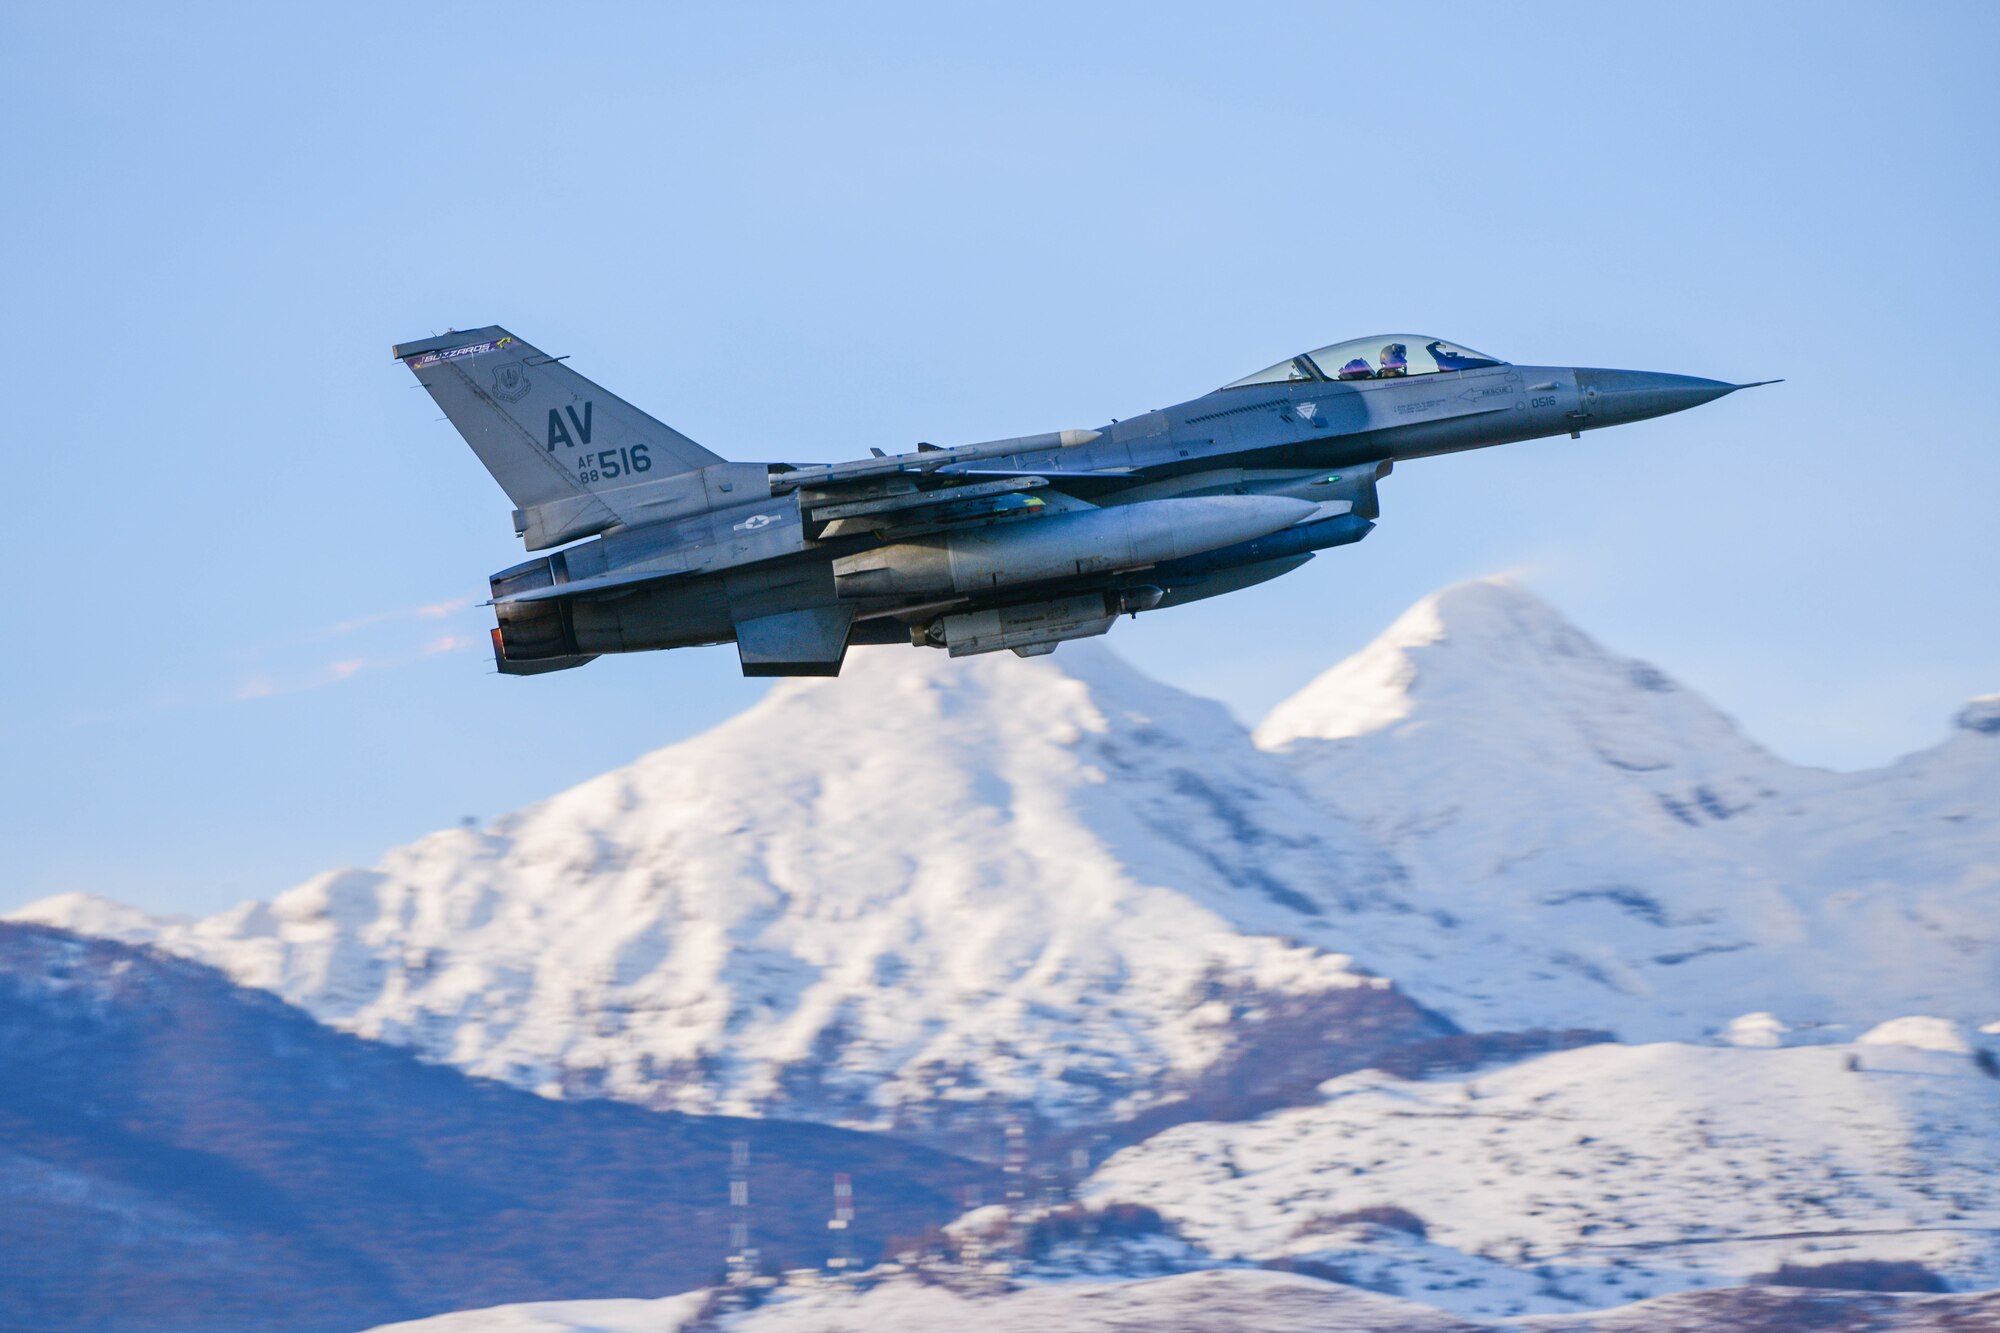 A U.S. Air Force F-16 Fighting Falcon assigned to the 510th Fighter Squadron, performs a mission sortie at Aviano Air Base, Italy, Nov. 30, 2021. In an air-to-surface role, the F-16 can fly more than 500 miles, deliver its weapons with superior accuracy, defend itself against enemy aircraft, and return to its starting point. An all-weather capability allows it to accurately deliver ordnance during non-visual bombing conditions. (U.S. Air Force photo by Senior Airman Brooke Moeder)